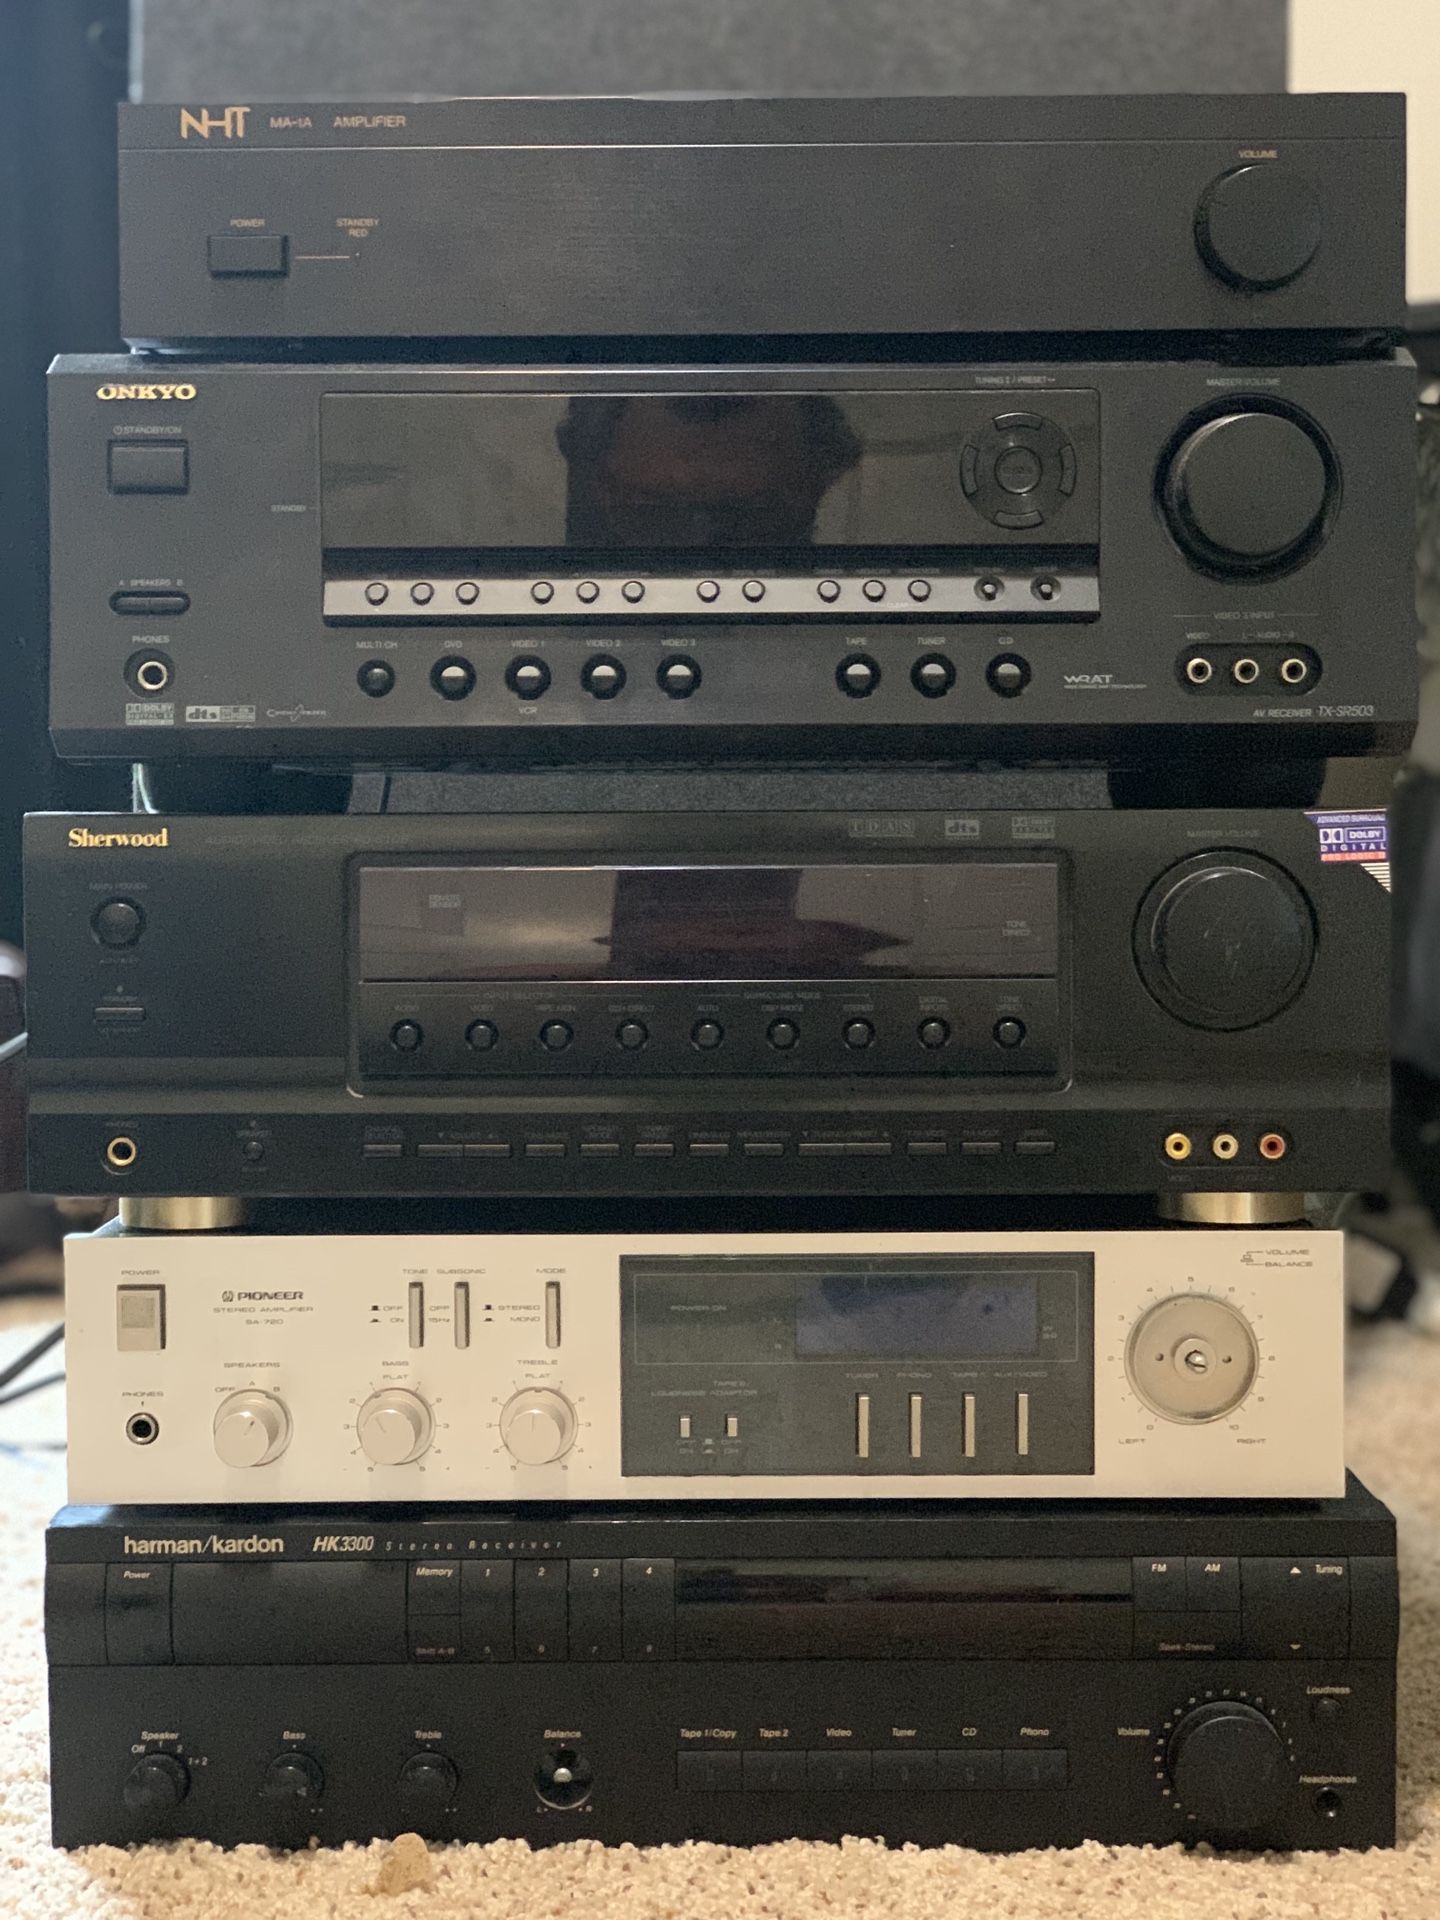 Home theater and stereo receivers